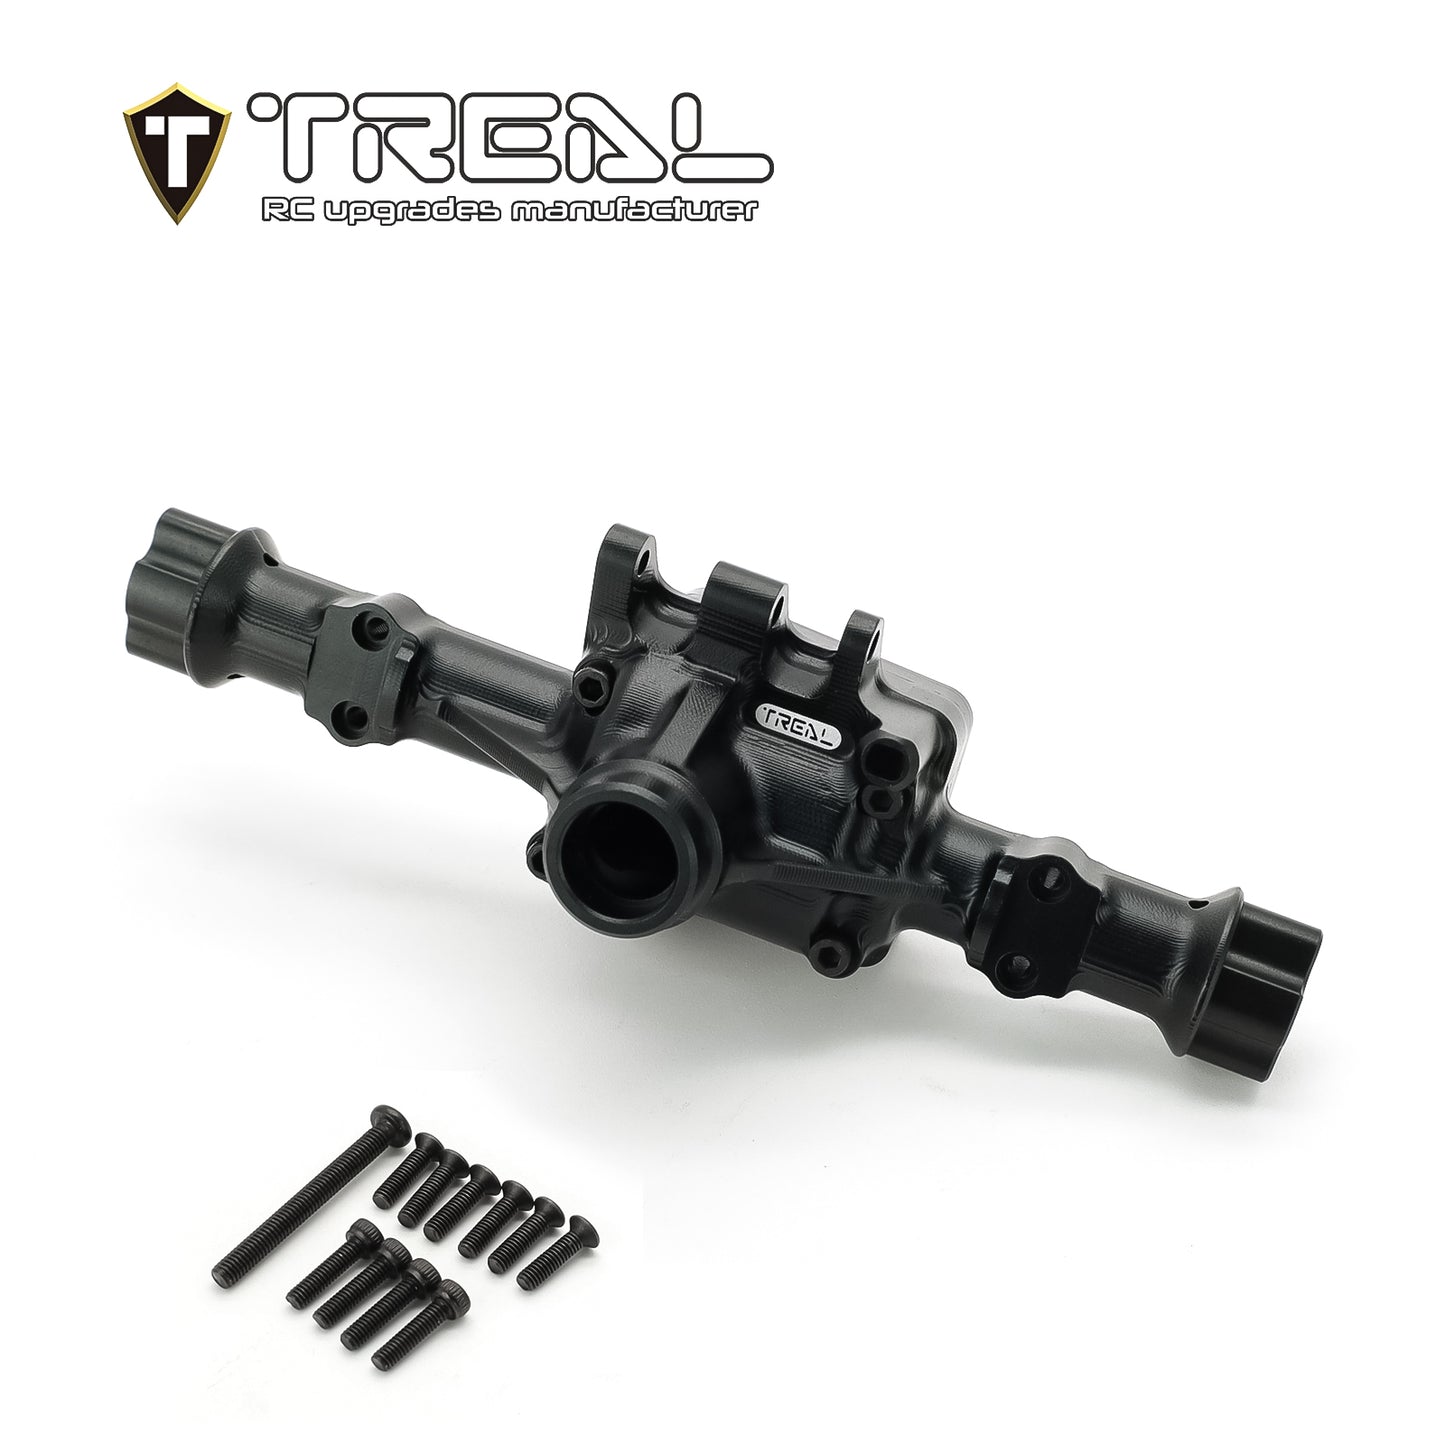 TREAL TRX-6 Intermediate Axle Housing, Aluminum 7075 CNC Billet Middle Axle Housing, with Differential Cover for TRX6 G 63, TRX-6 Ultimate RC Hauler